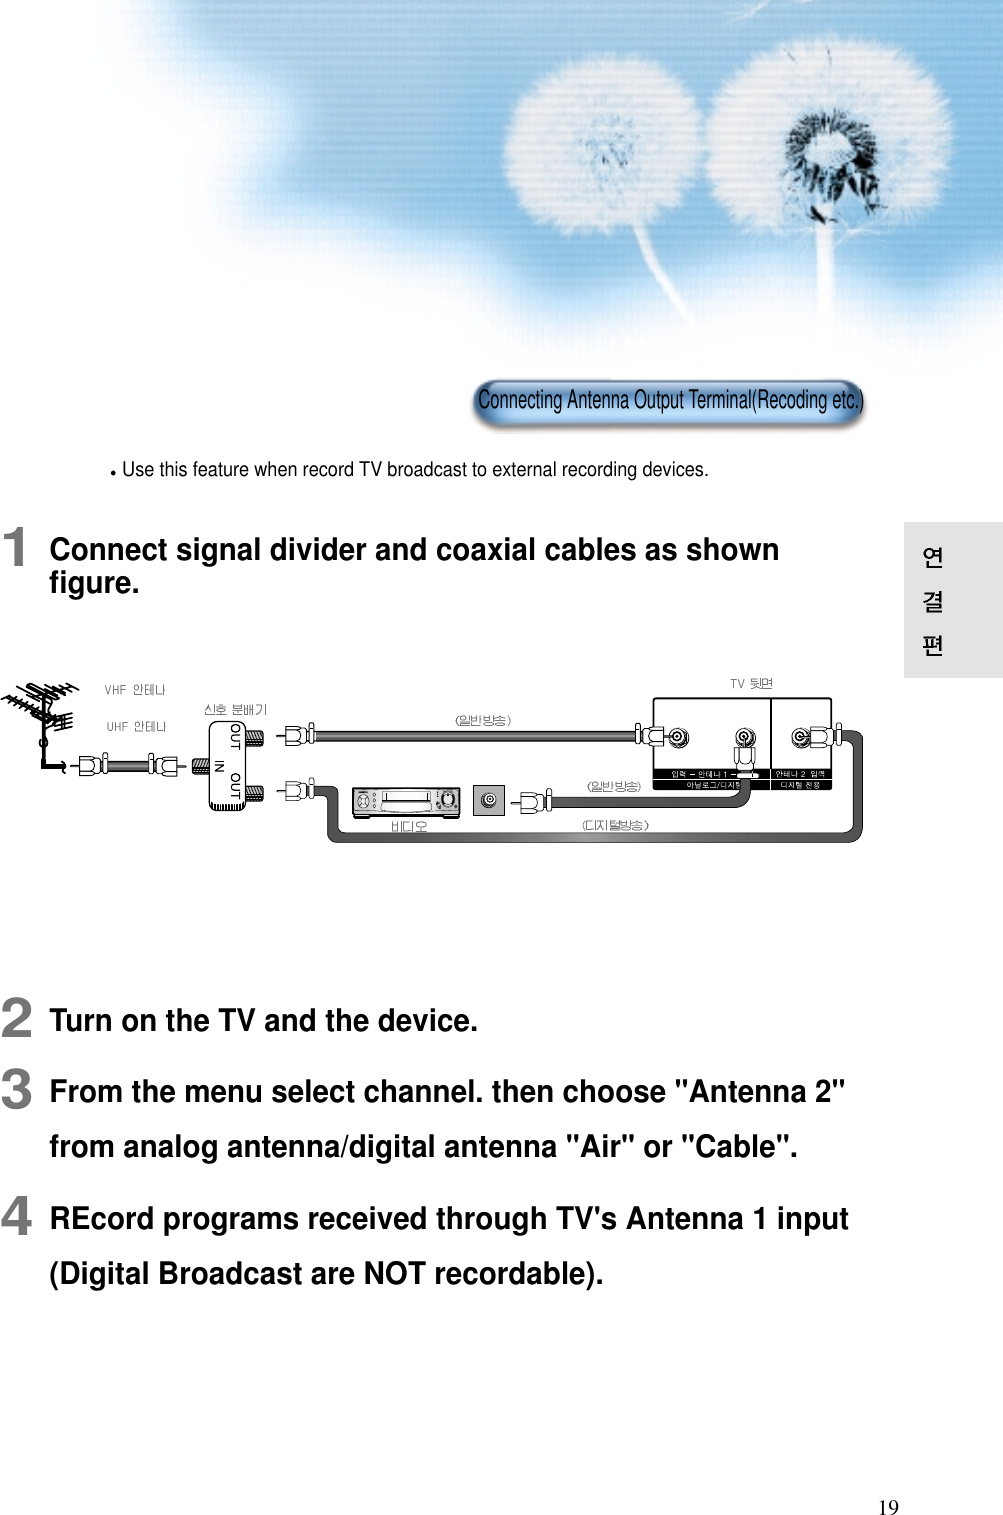 191Connect signal divider and coaxial cables as shownﬁgure.2Turn on the TV and the device.3From the menu select channel. then choose &quot;Antenna 2&quot;from analog antenna/digital antenna &quot;Air&quot; or &quot;Cable&quot;.4REcord programs received through TV&apos;s Antenna 1 input(Digital Broadcast are NOT recordable).Use this feature when record TV broadcast to external recording devices.Connecting Antenna Output Terminal(Recoding etc.)